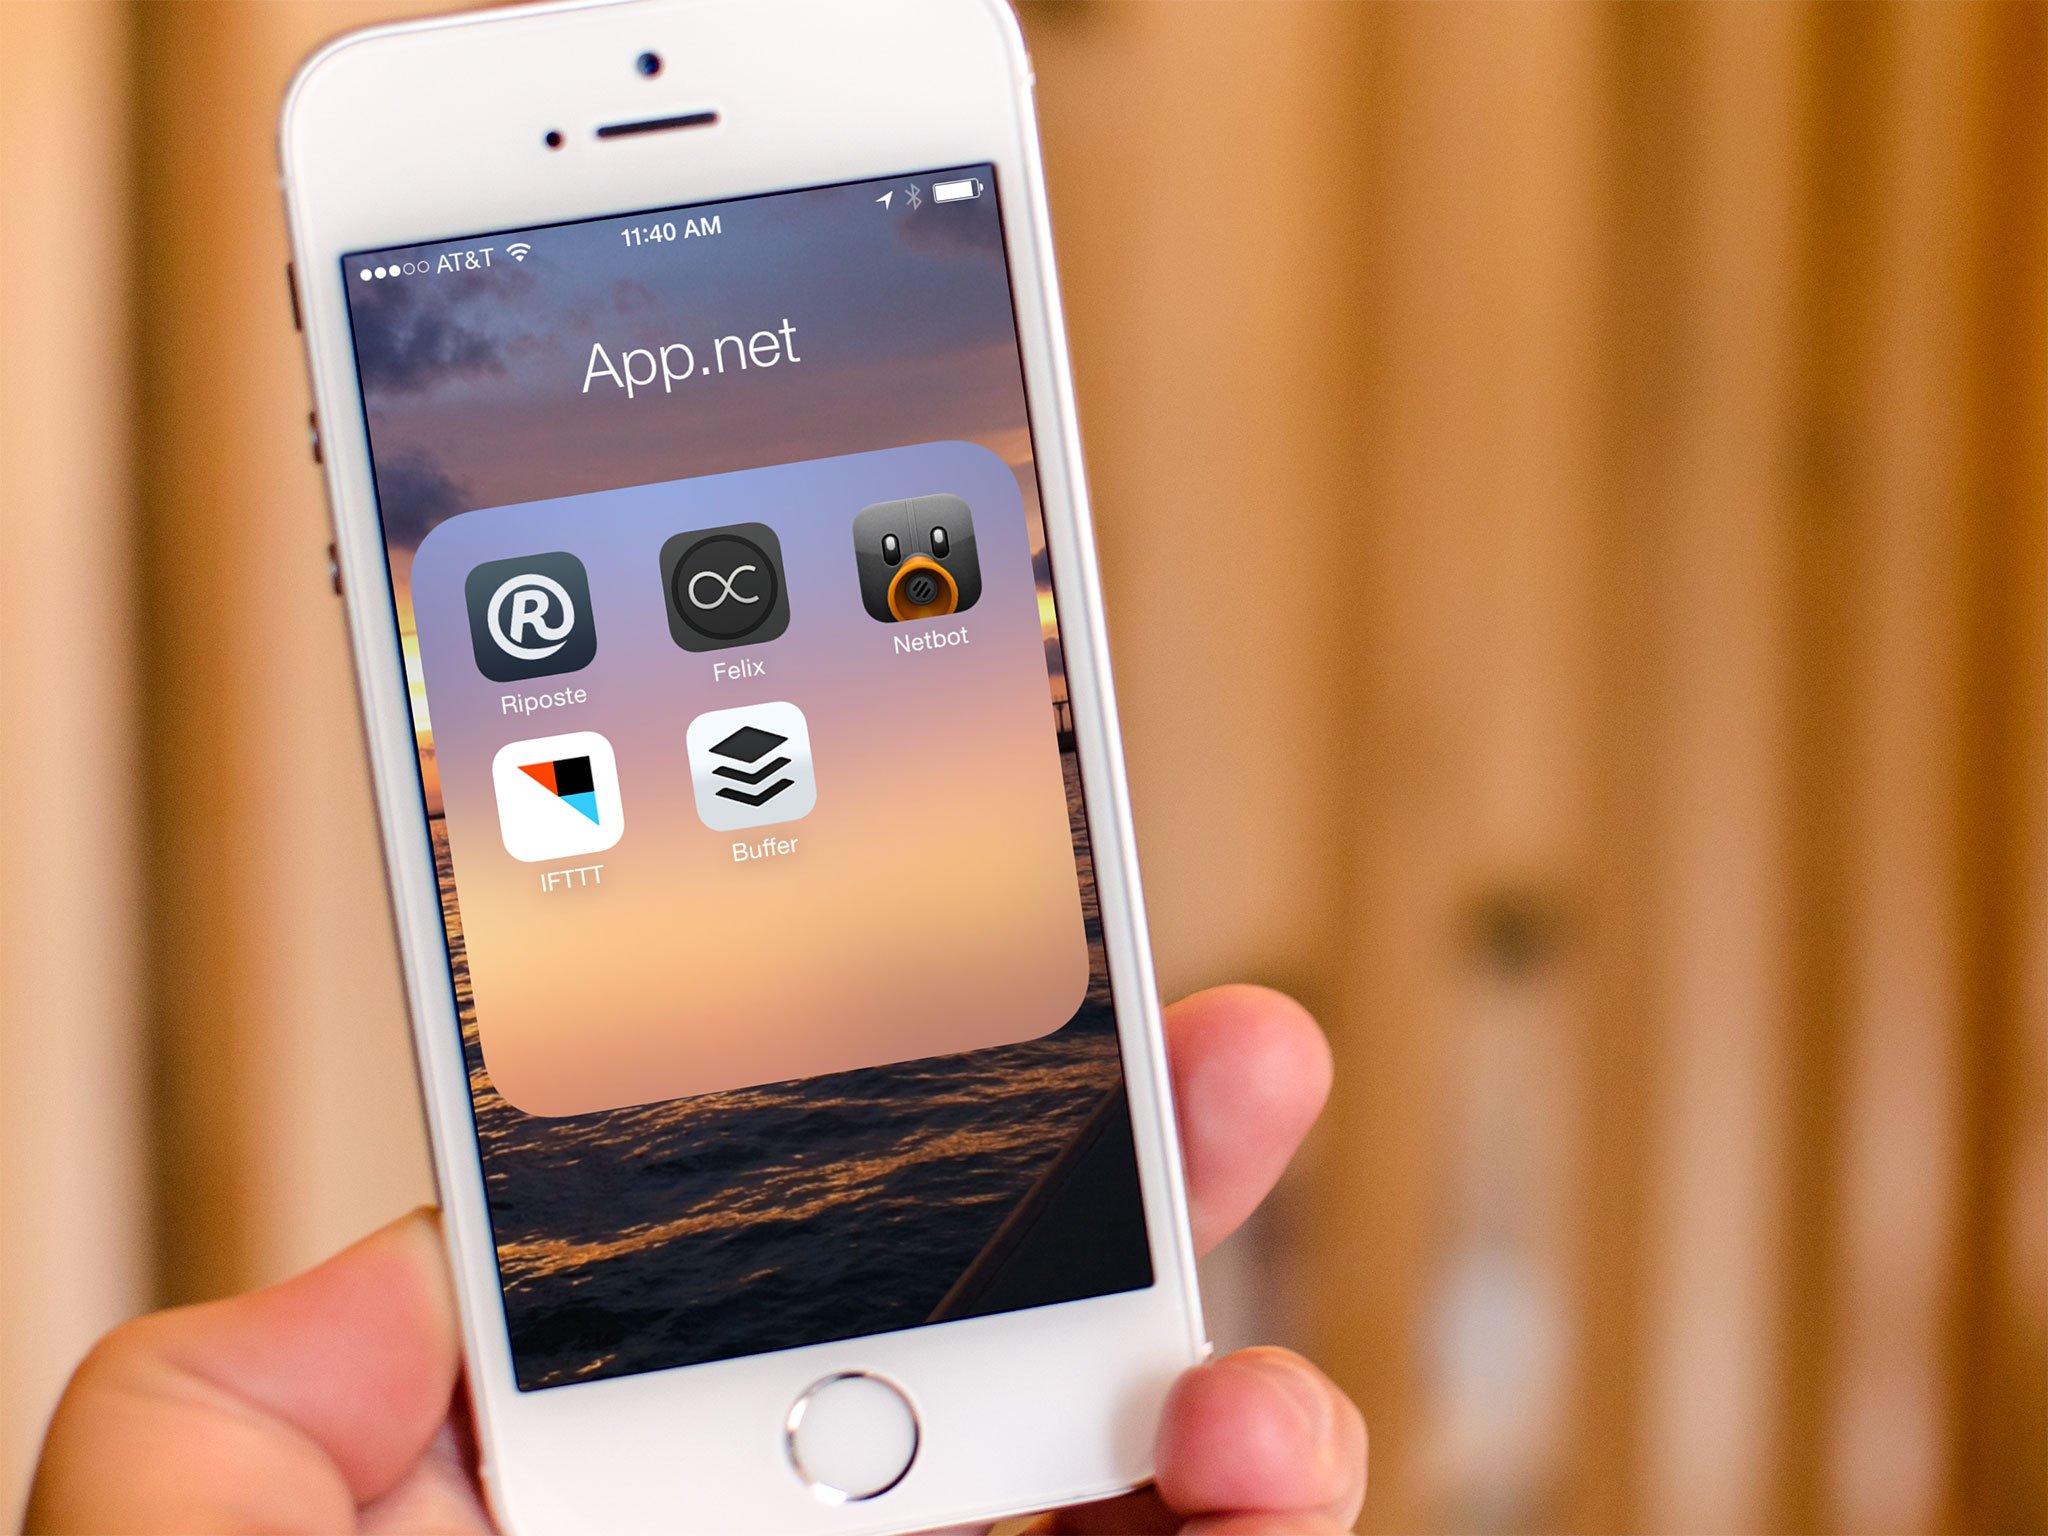 Best App.net apps for iPhone: Riposte, Netbot, Felix, and more!